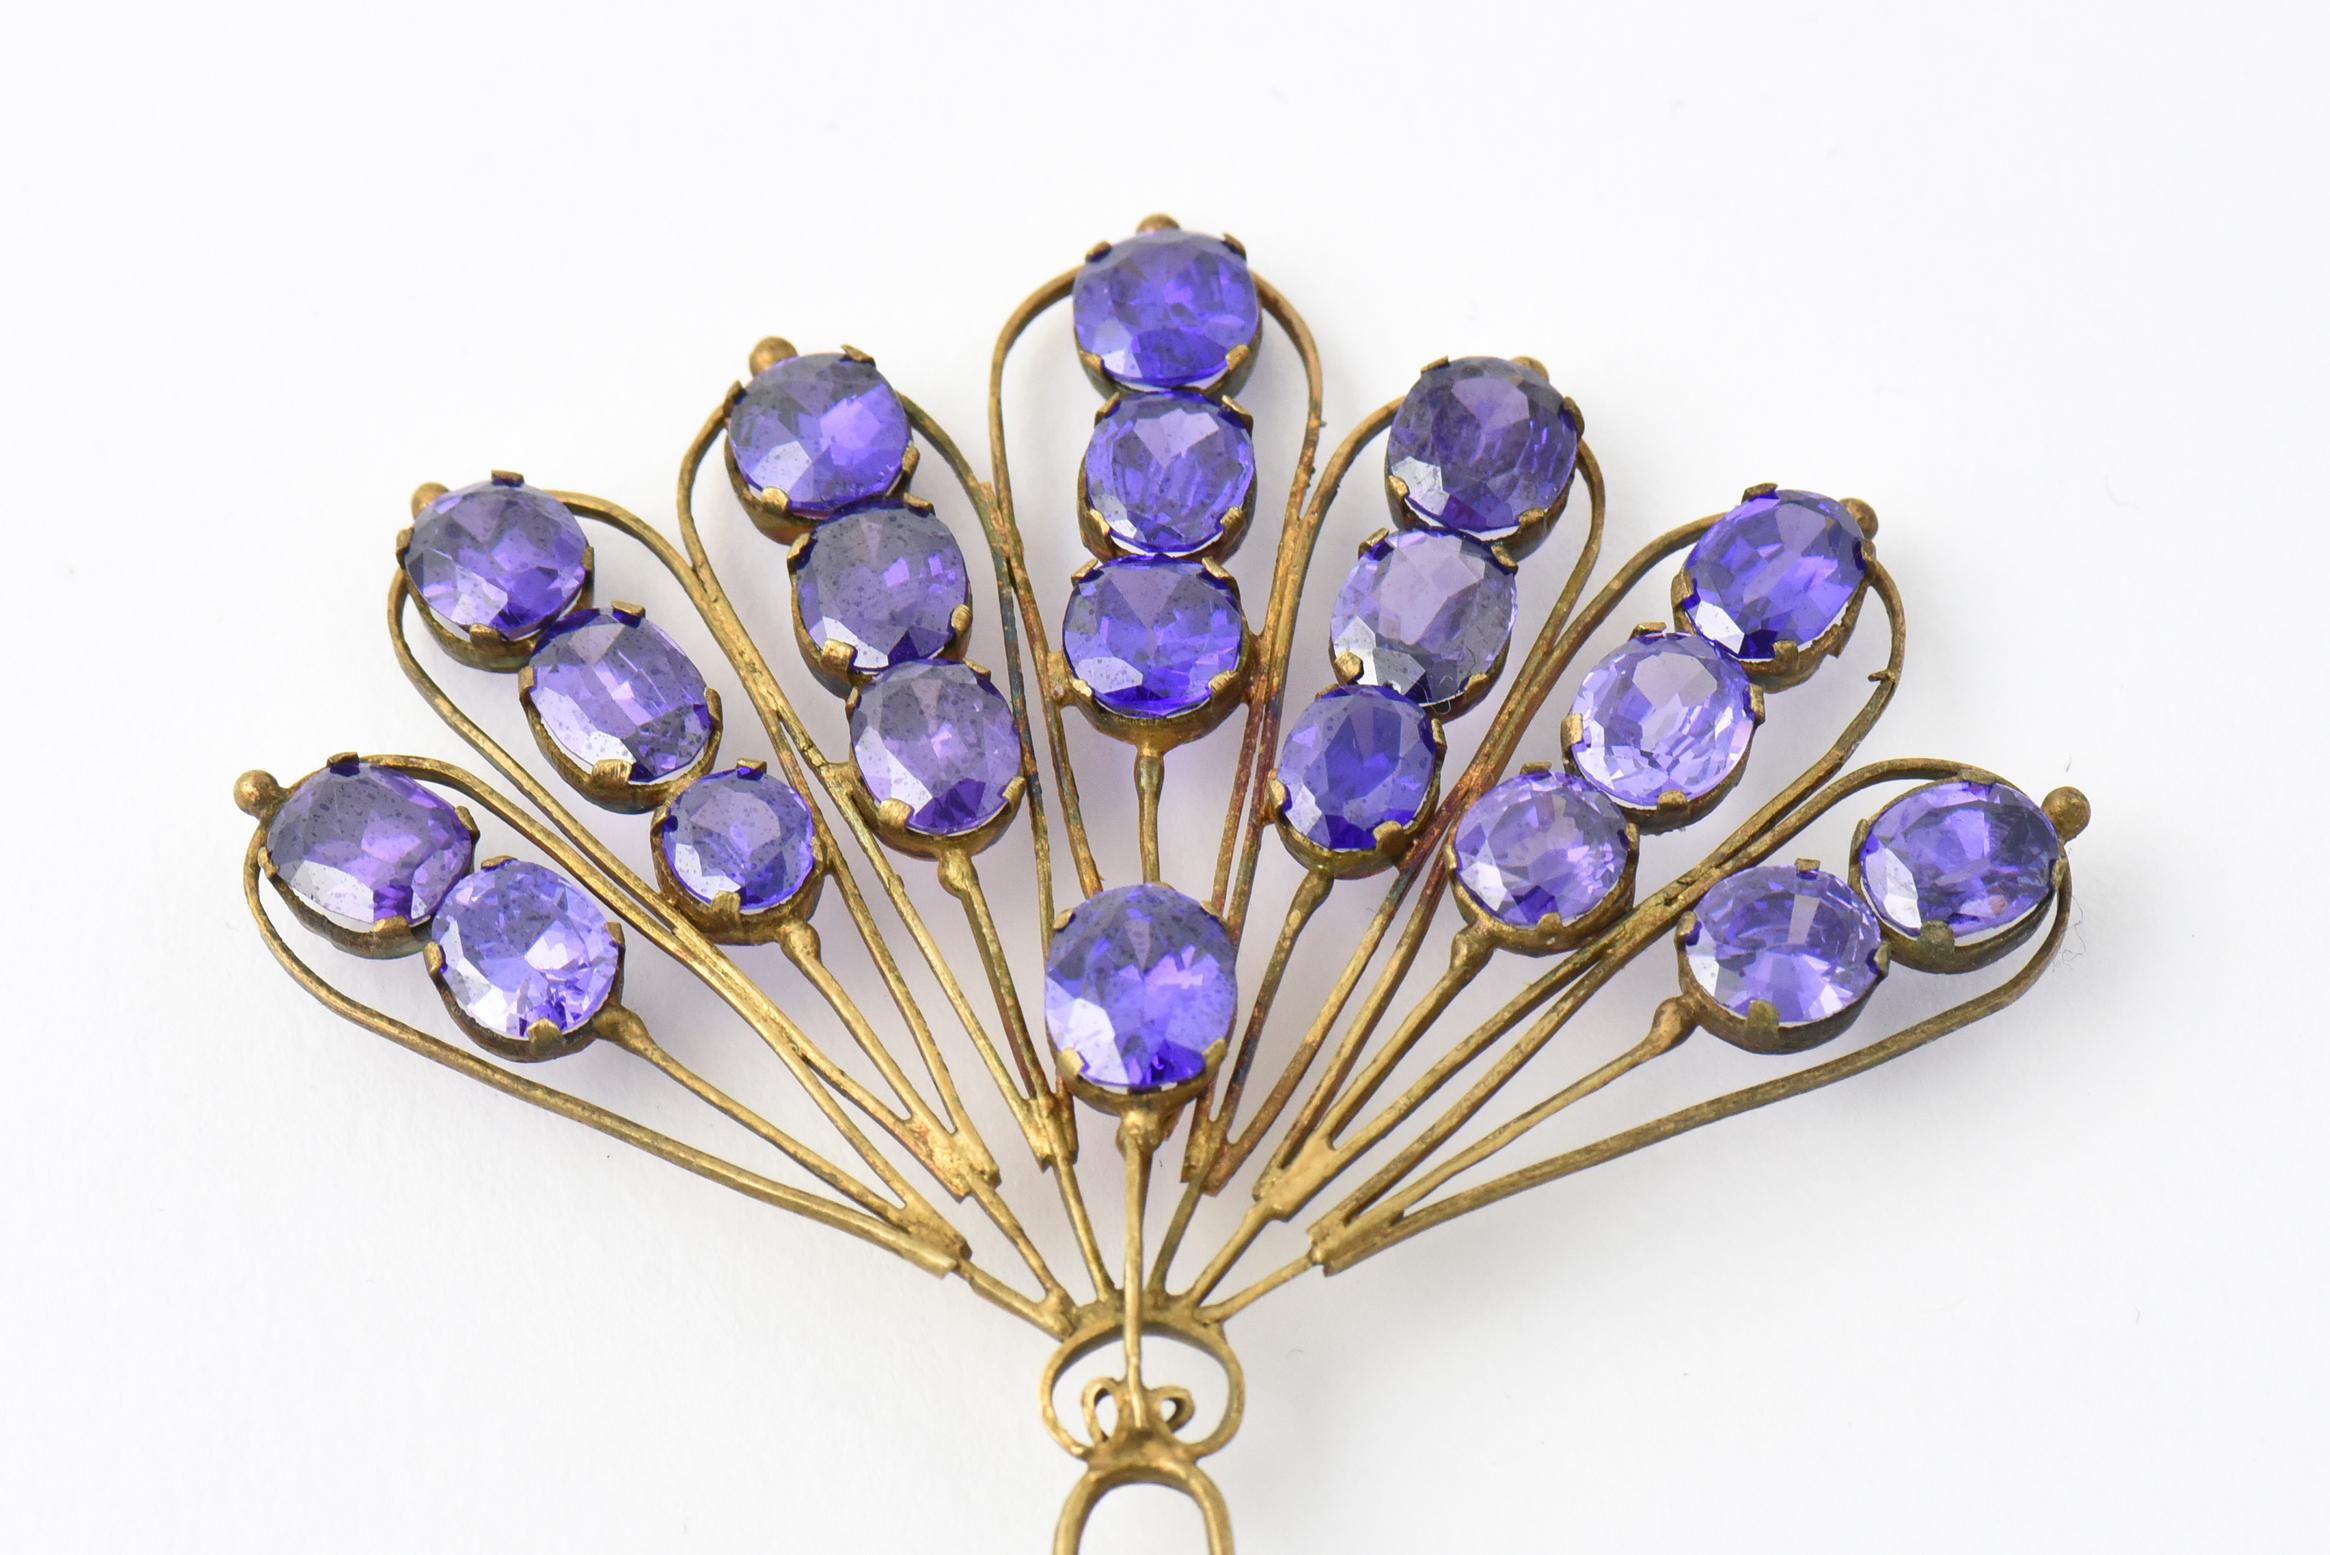 Victorian gilt silver hair comb/hairpin with peacock motif starring purple colored stones.
